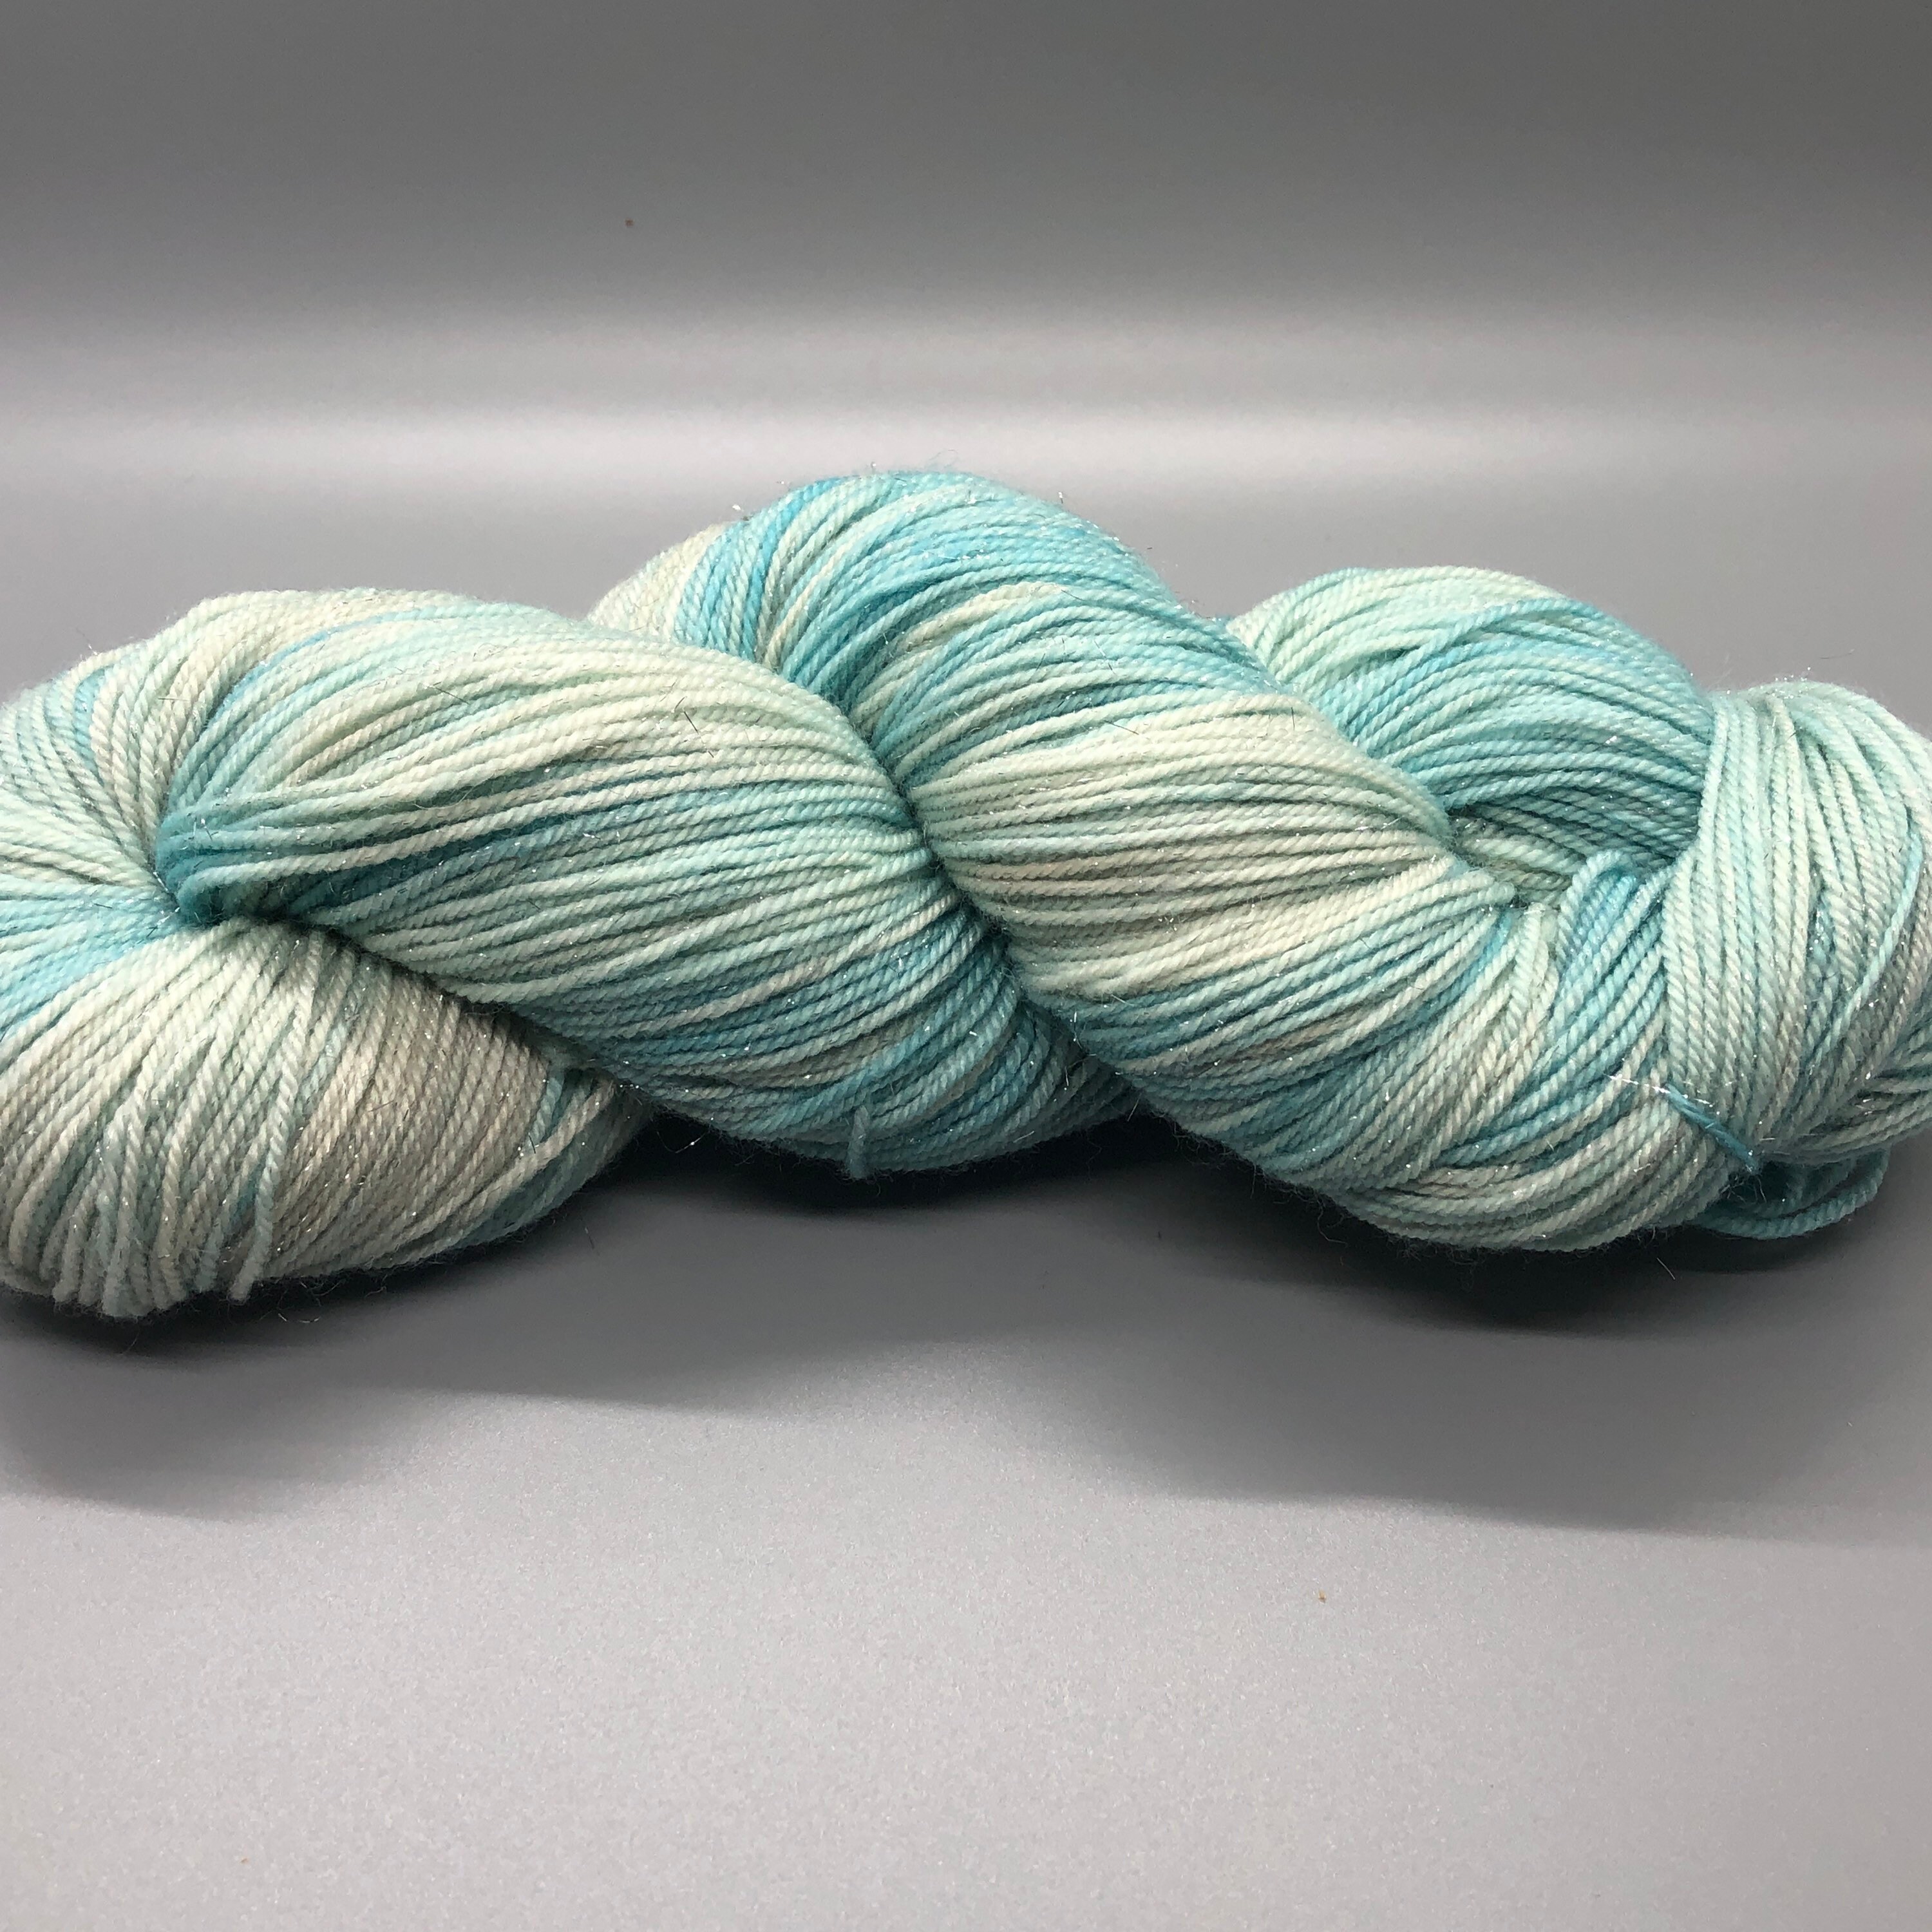 Hand Dyed Assigned Pooling Yarn Mint Colorway Green Ice Blue